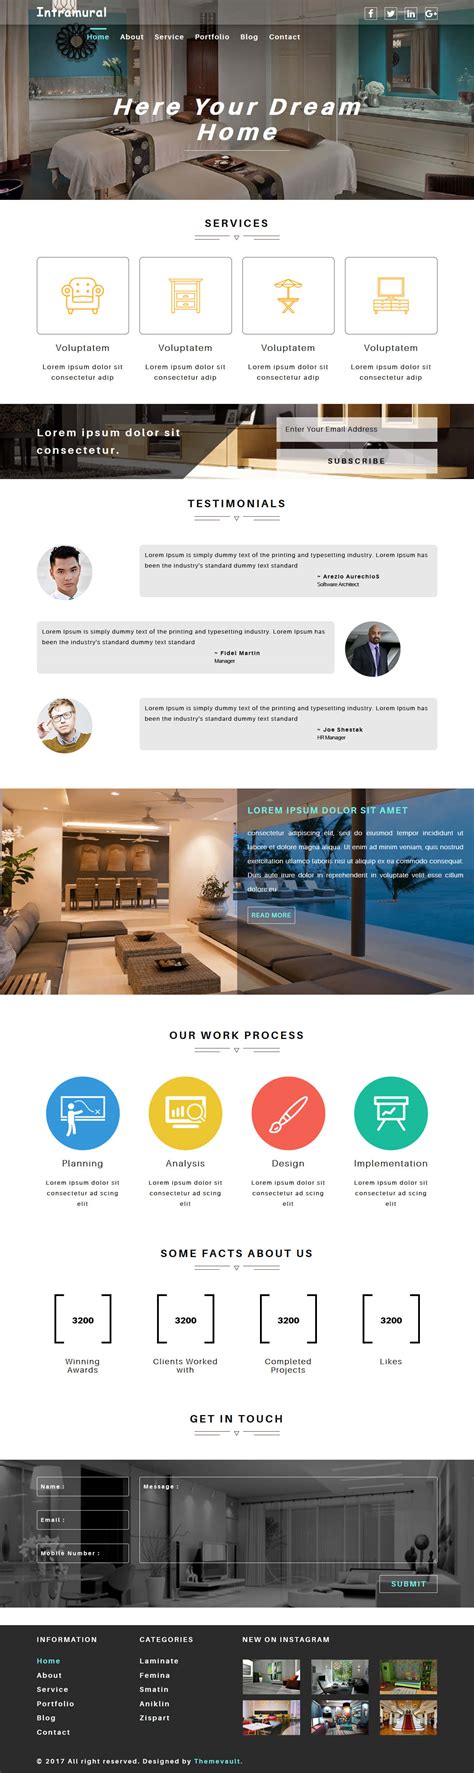 Studio ux interior design website template free download which specially made for interior design services. Intramural - Free Interior Design Website Template ...